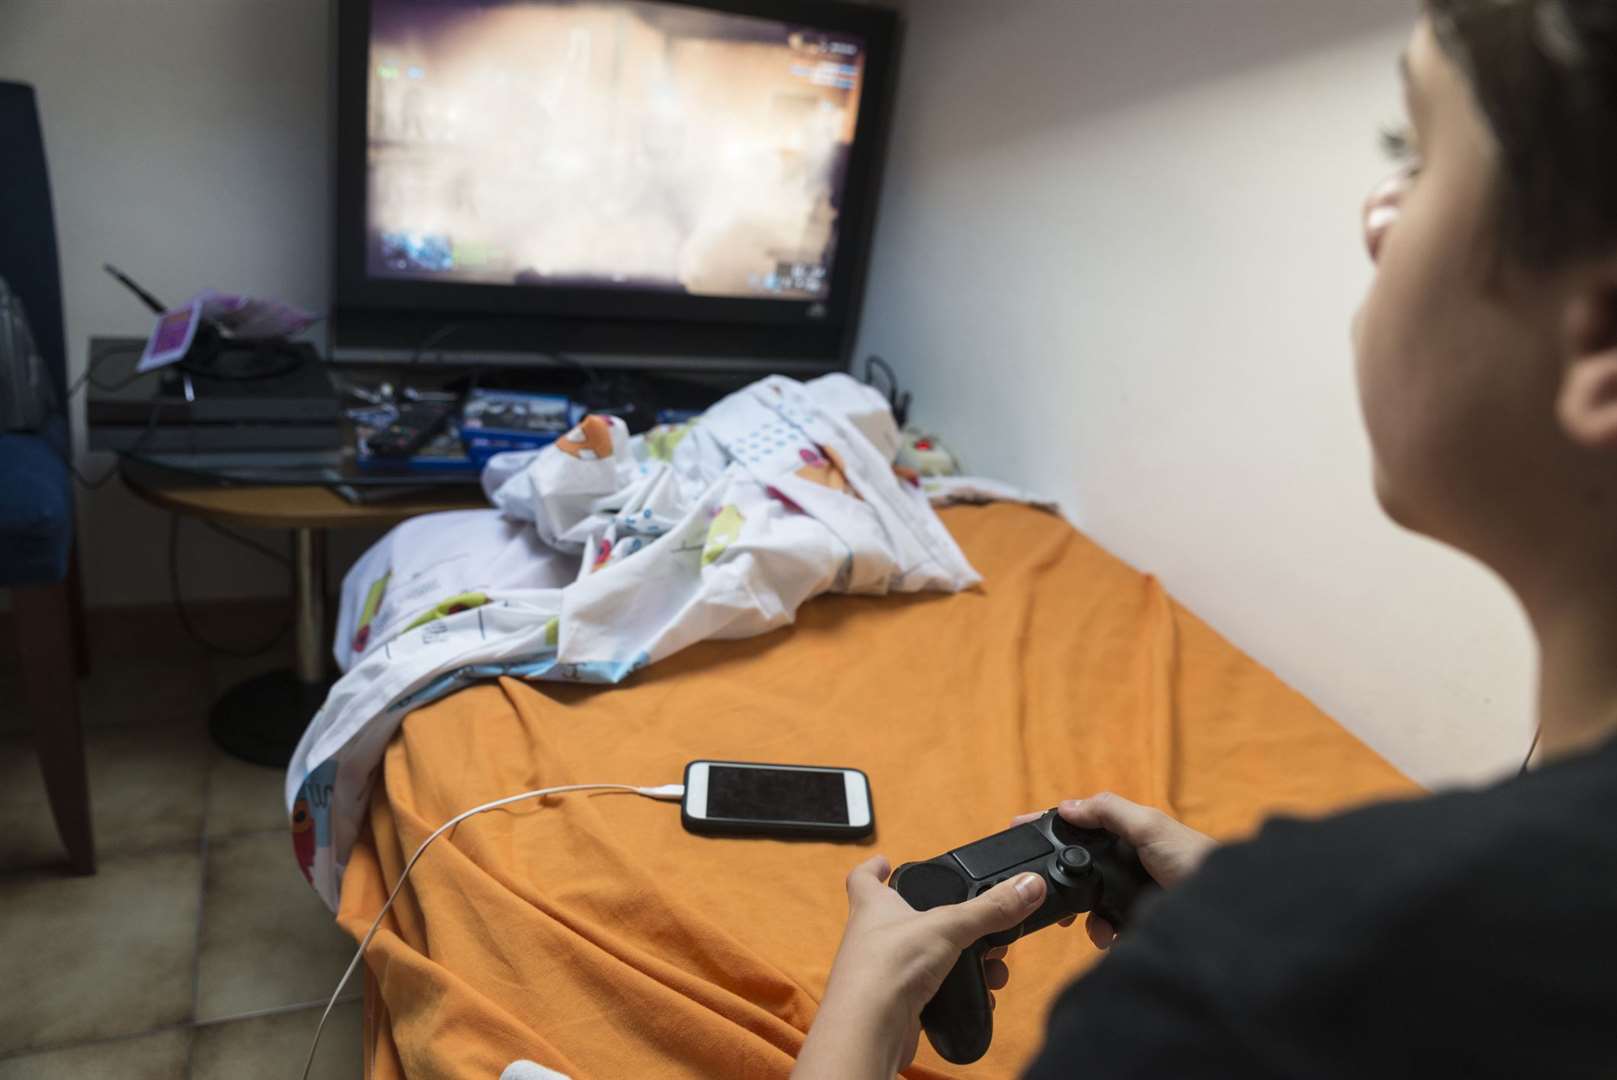 The feeling of isolation is reduced when playing online games with friends. Picture: Jordi de Rueda